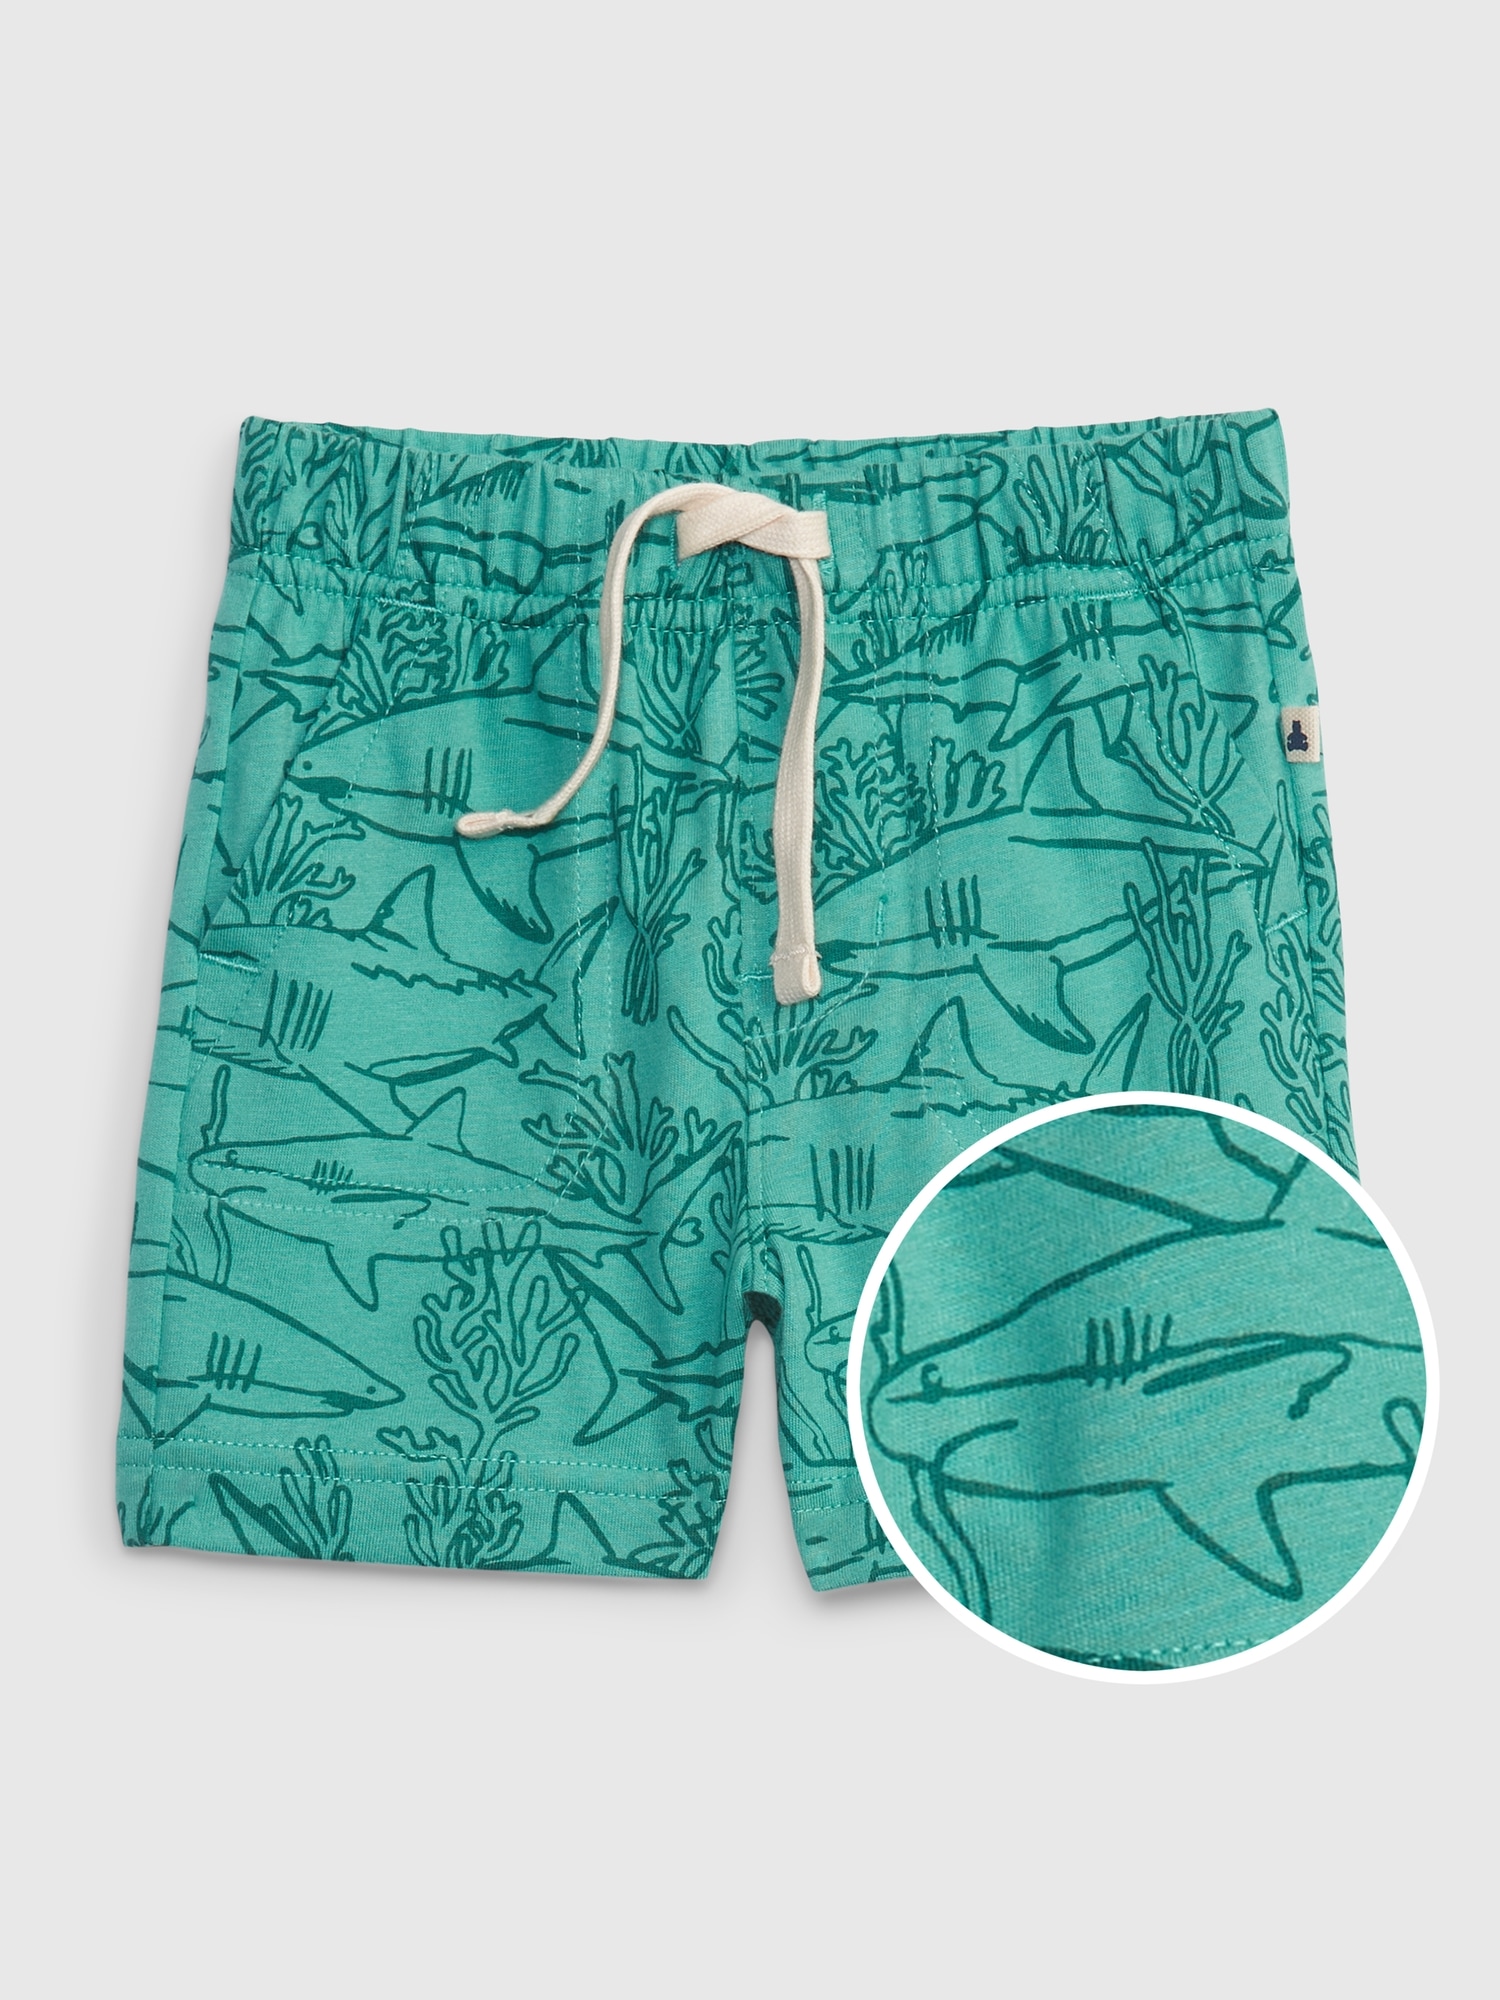 Gap Baby Organic Cotton Mix and Match Pull-On Shorts blue. 1